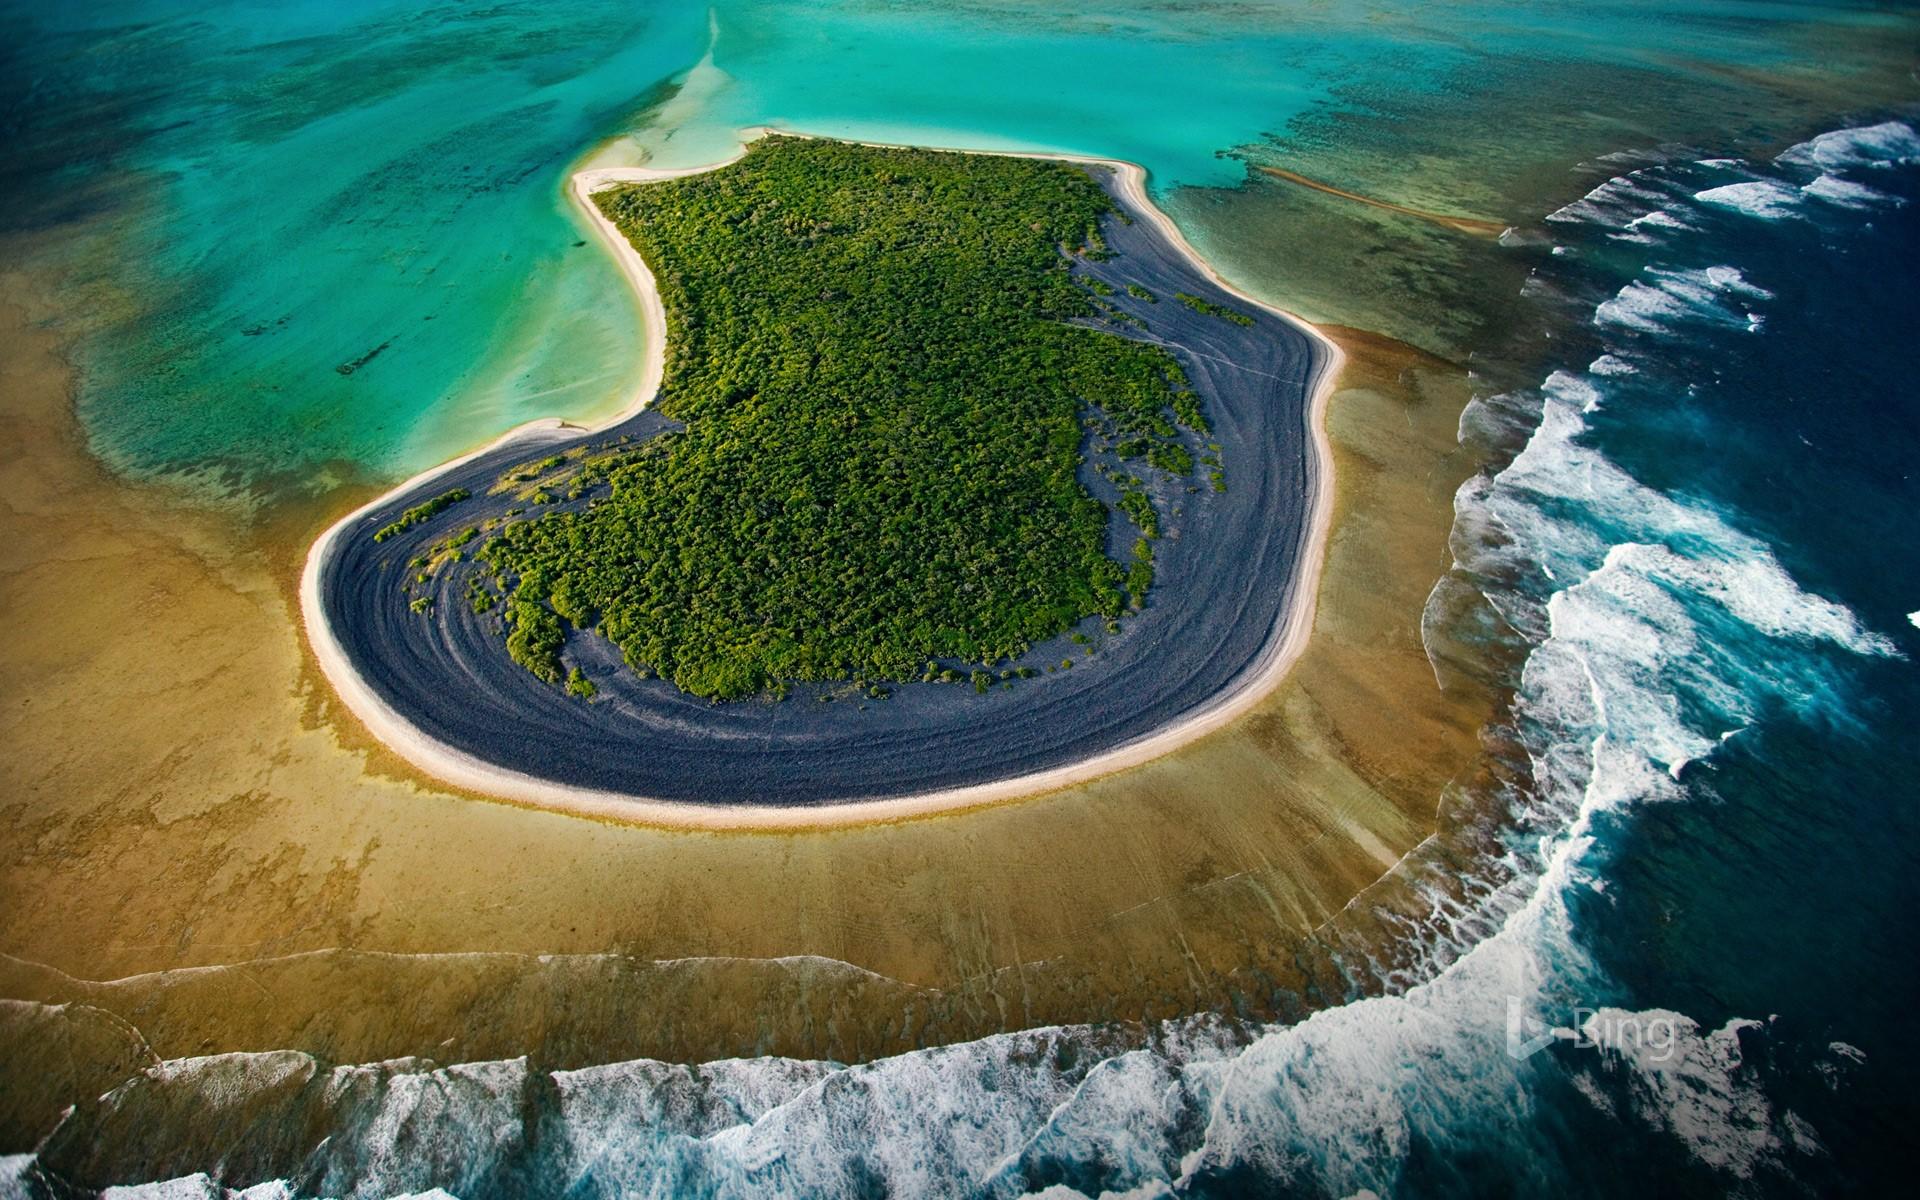 Nuami Islet, Nokan Hui atoll at the south of the Isle of Pines, New